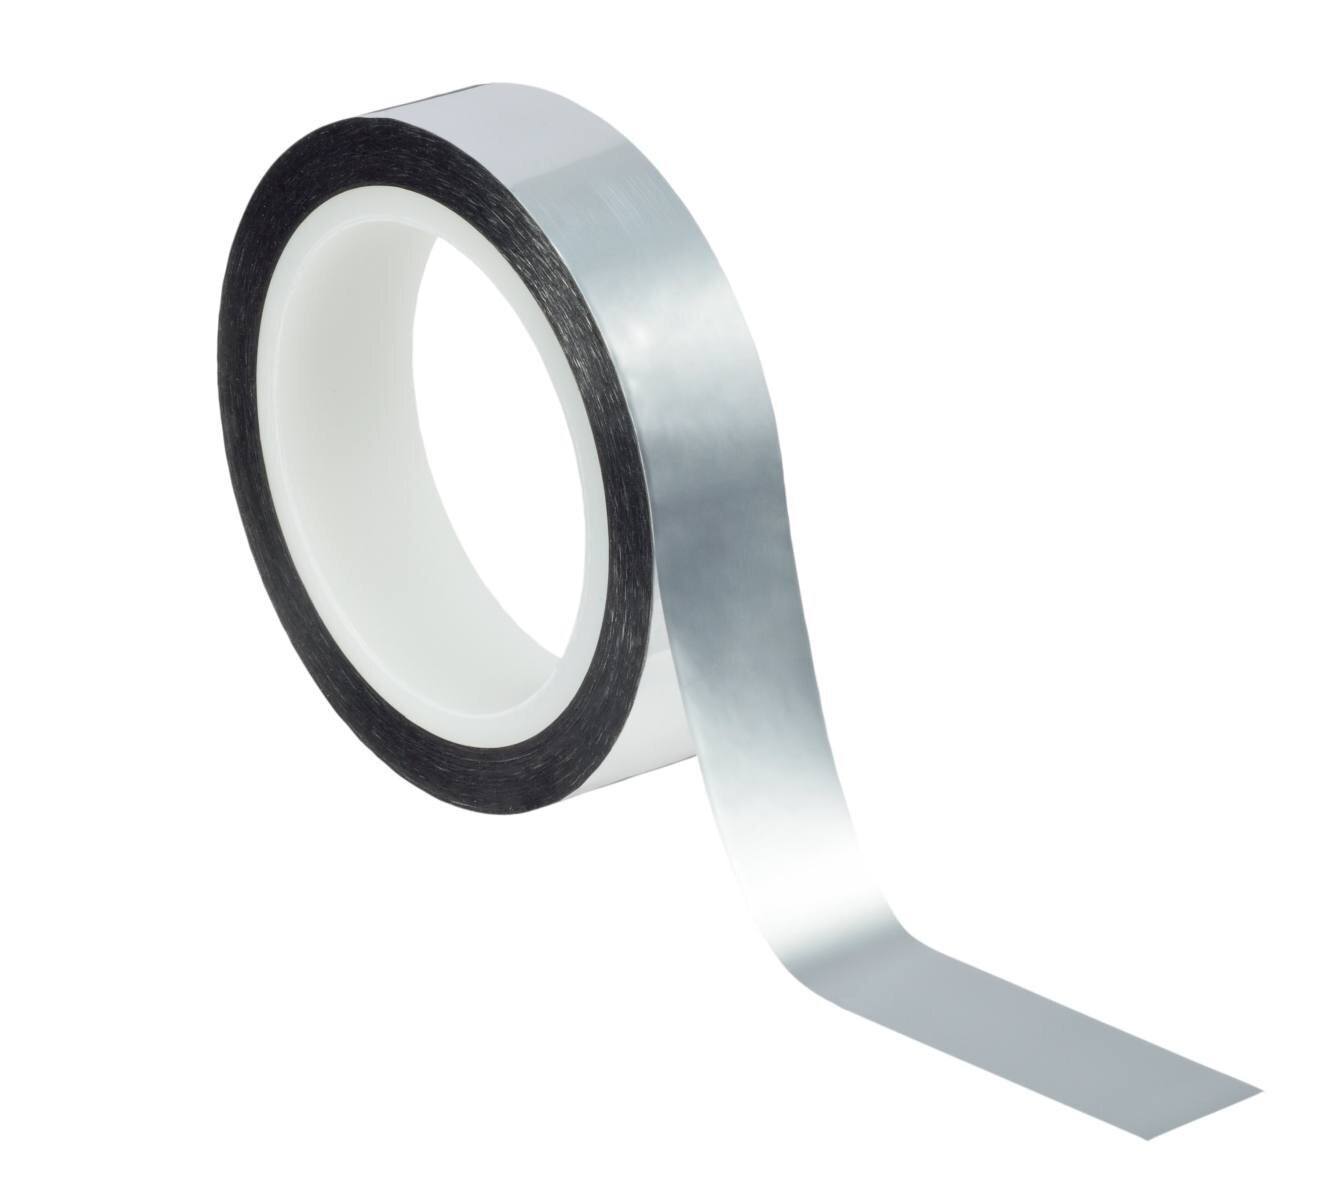 3M polyester adhesive tape 850 S, silver, 25 mm x 66 m, 0.05 mm